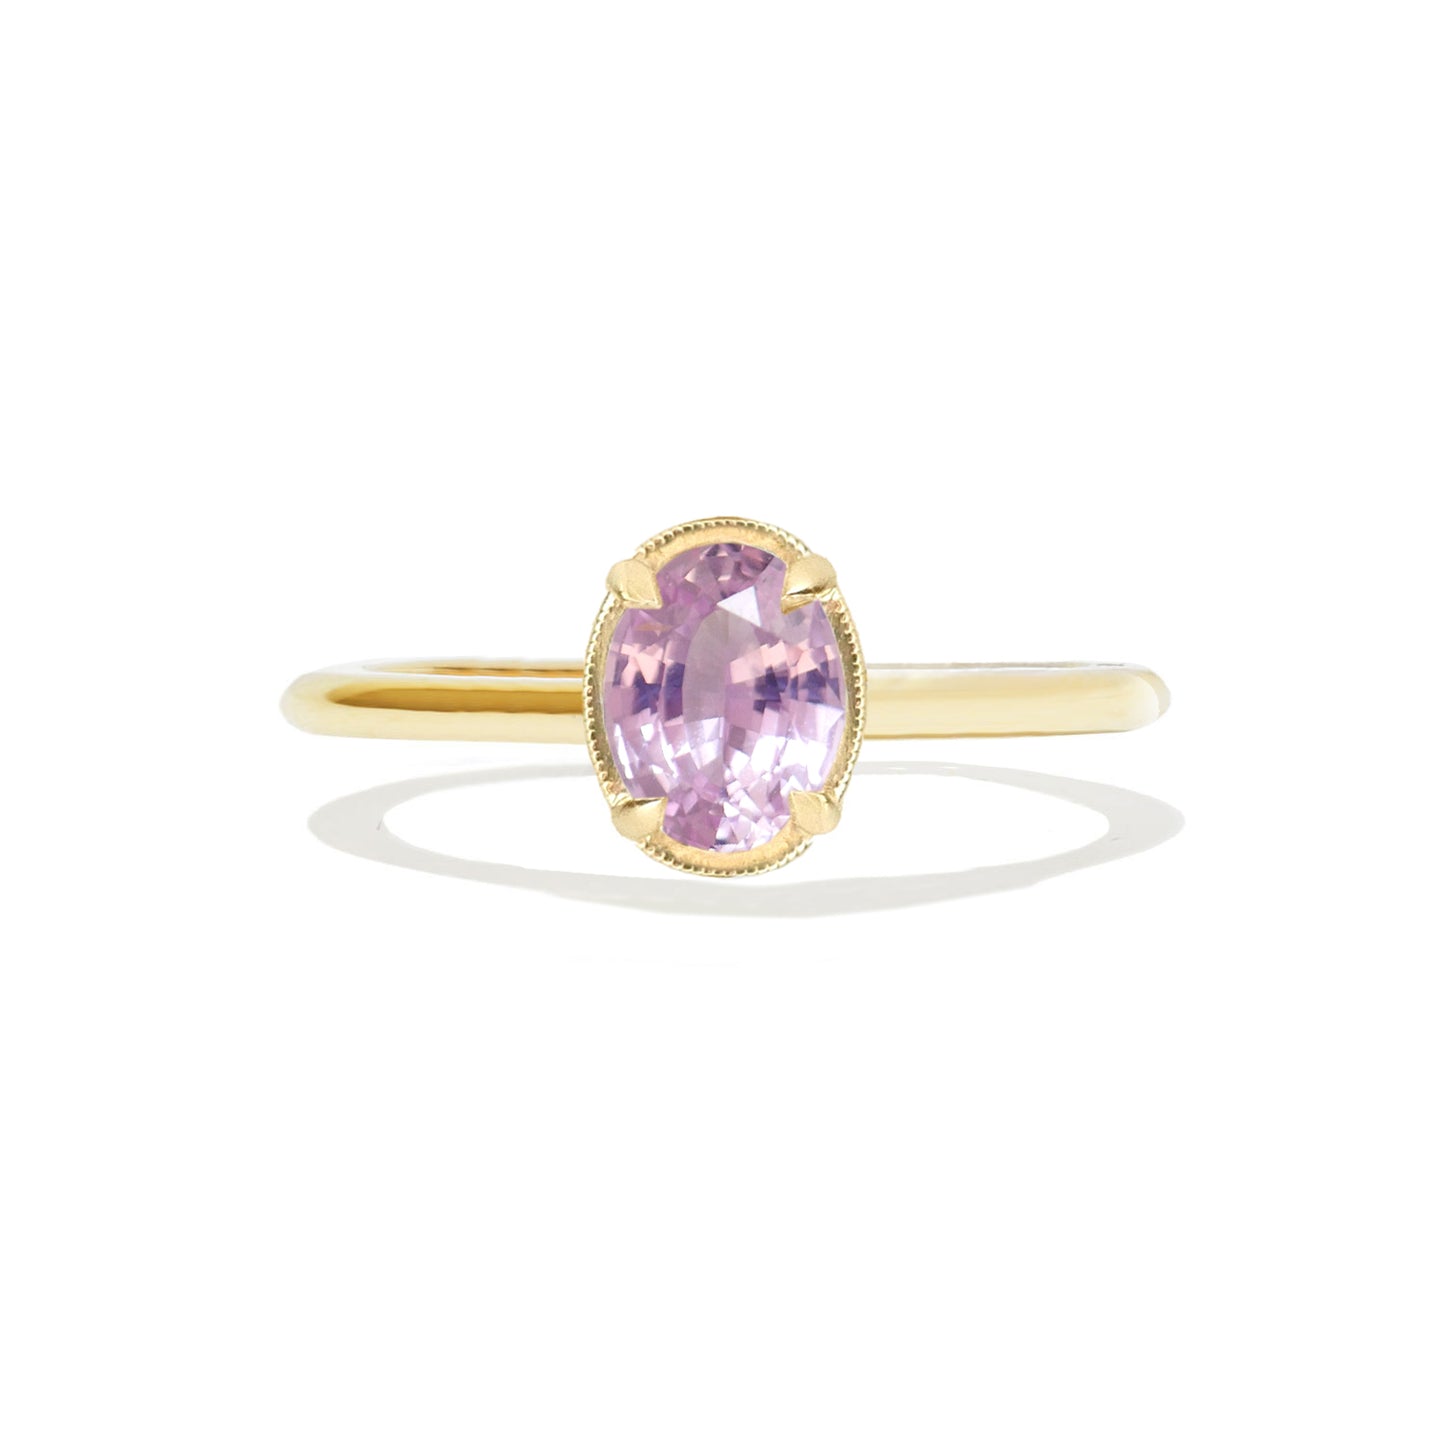 1.98 ctw Oval Pink Sapphire